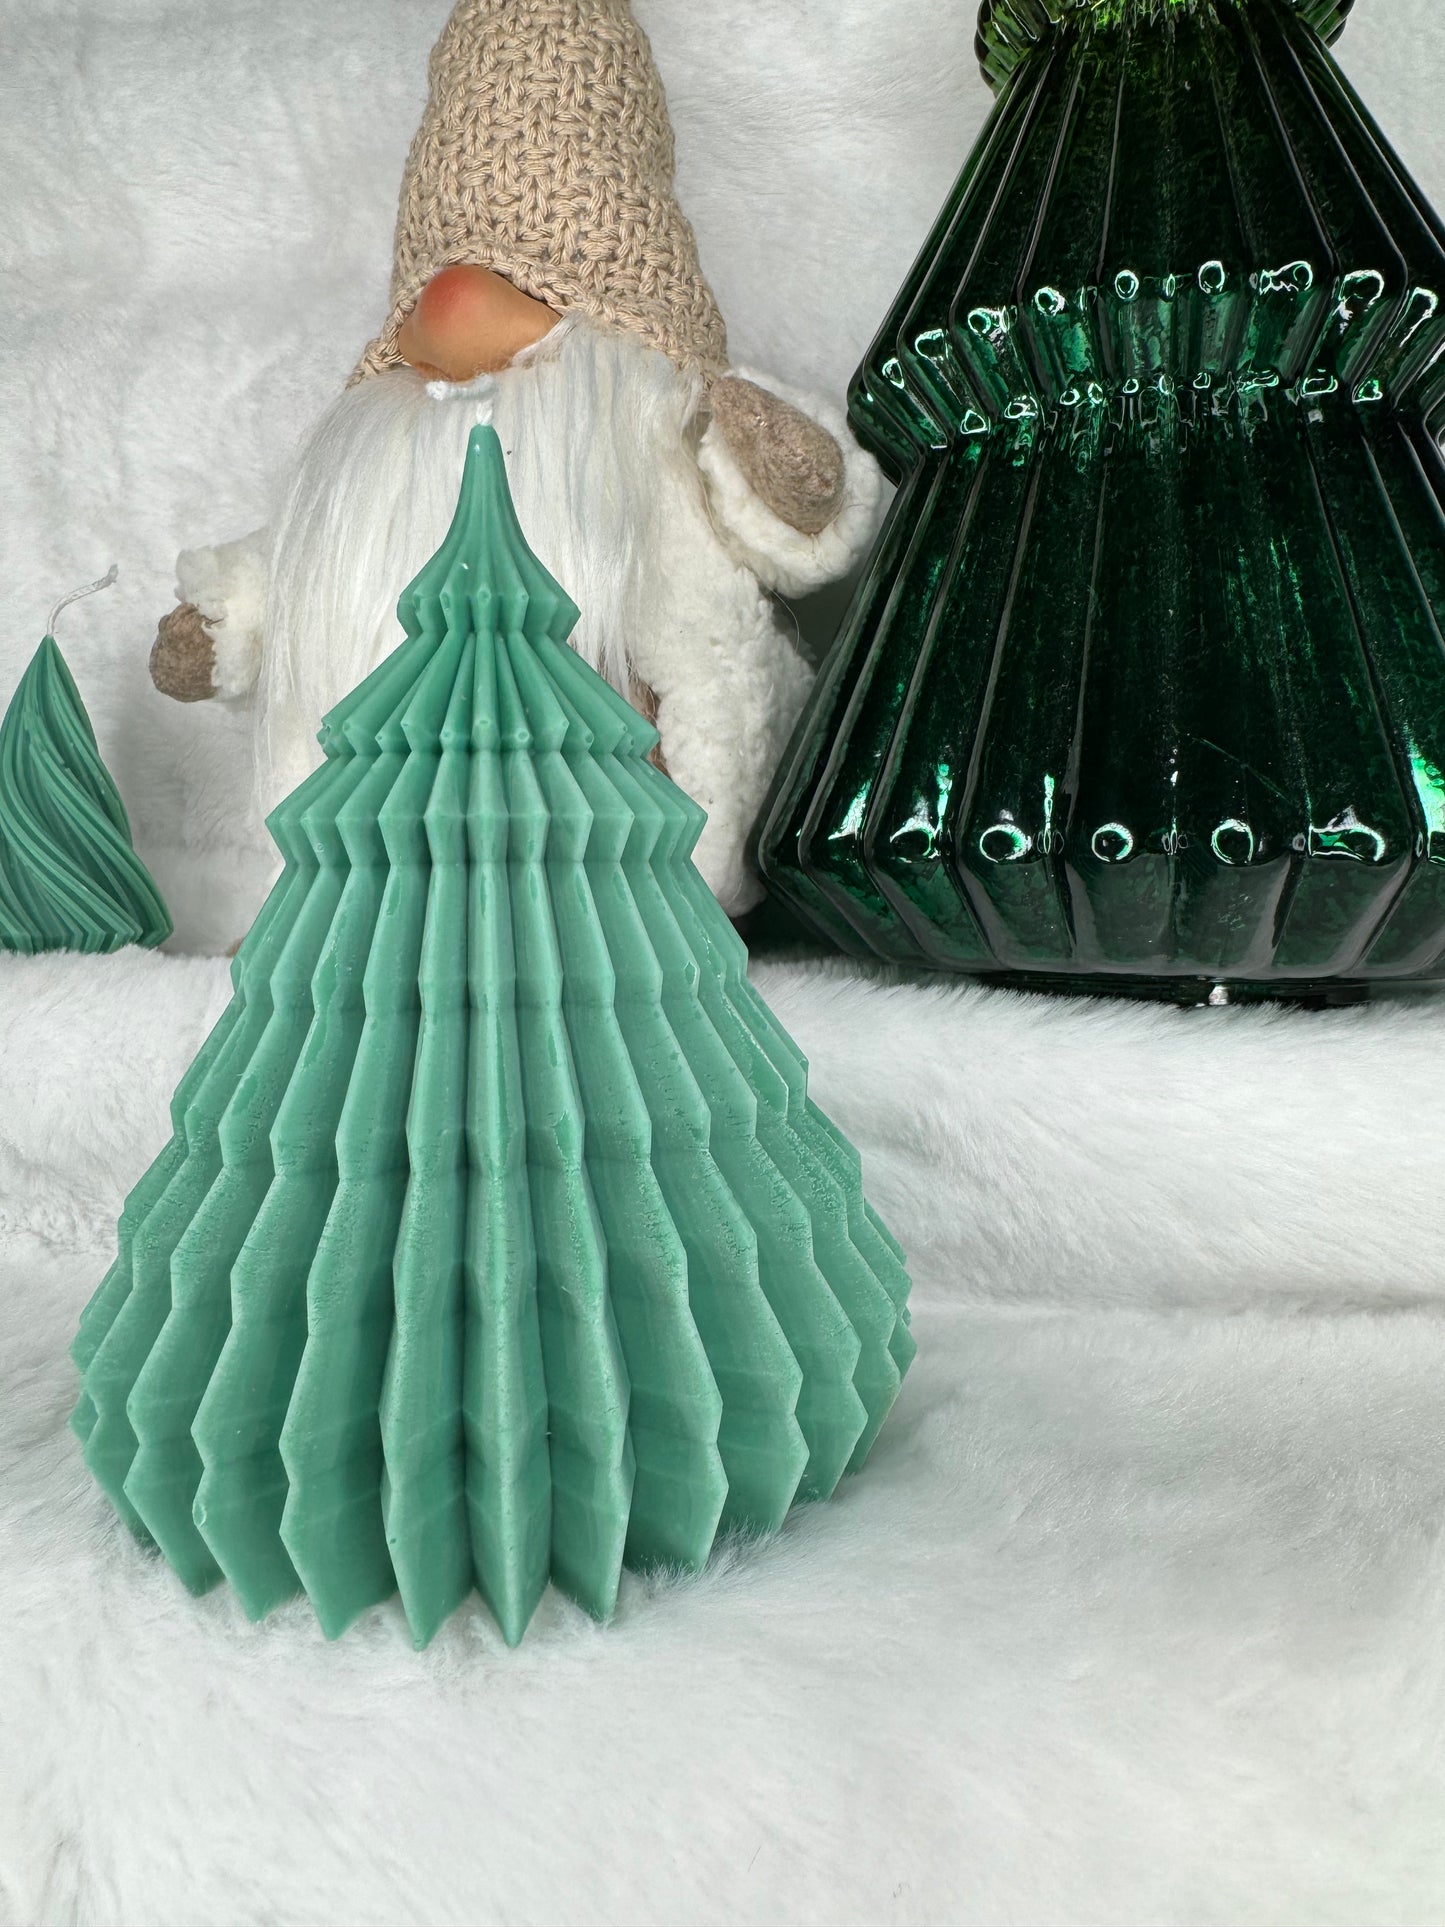 Christmas Spruce Tree Candle